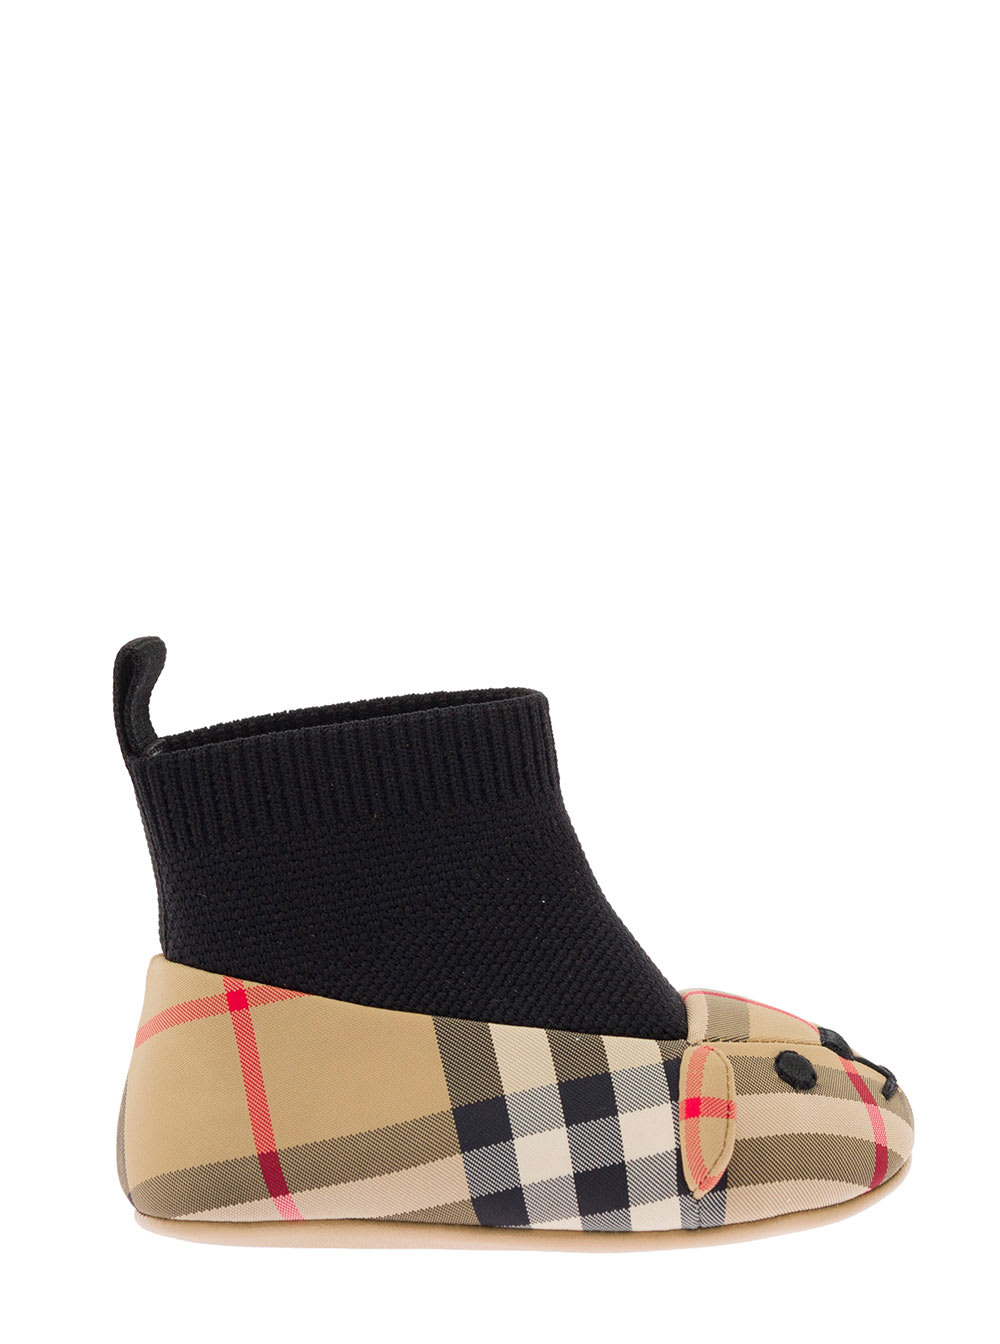 Burberry Beige Socks Shoes In Padded Fabric With Vintage Check Pattern And Bear Shape Toe Buberry Kids